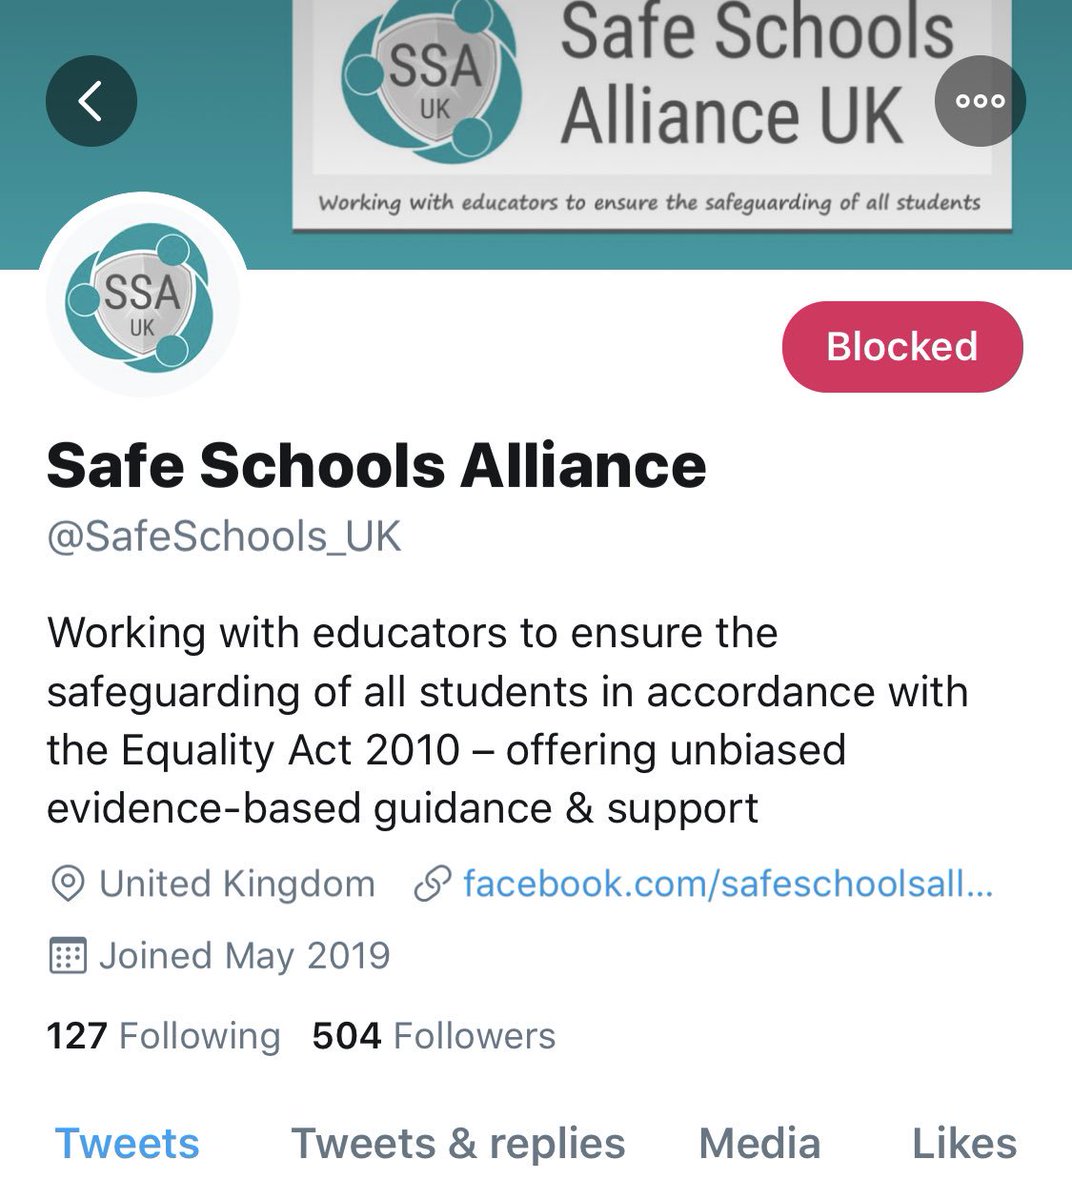 The complaint was initiated by a days-old twitter account, with the ‘official sounding’ name of ‘Safe Schools Alliance’ and was quickly amplified by The Times journalist - and known anti-transgender campaigner - Janice Turner ( @victoriapeckham)